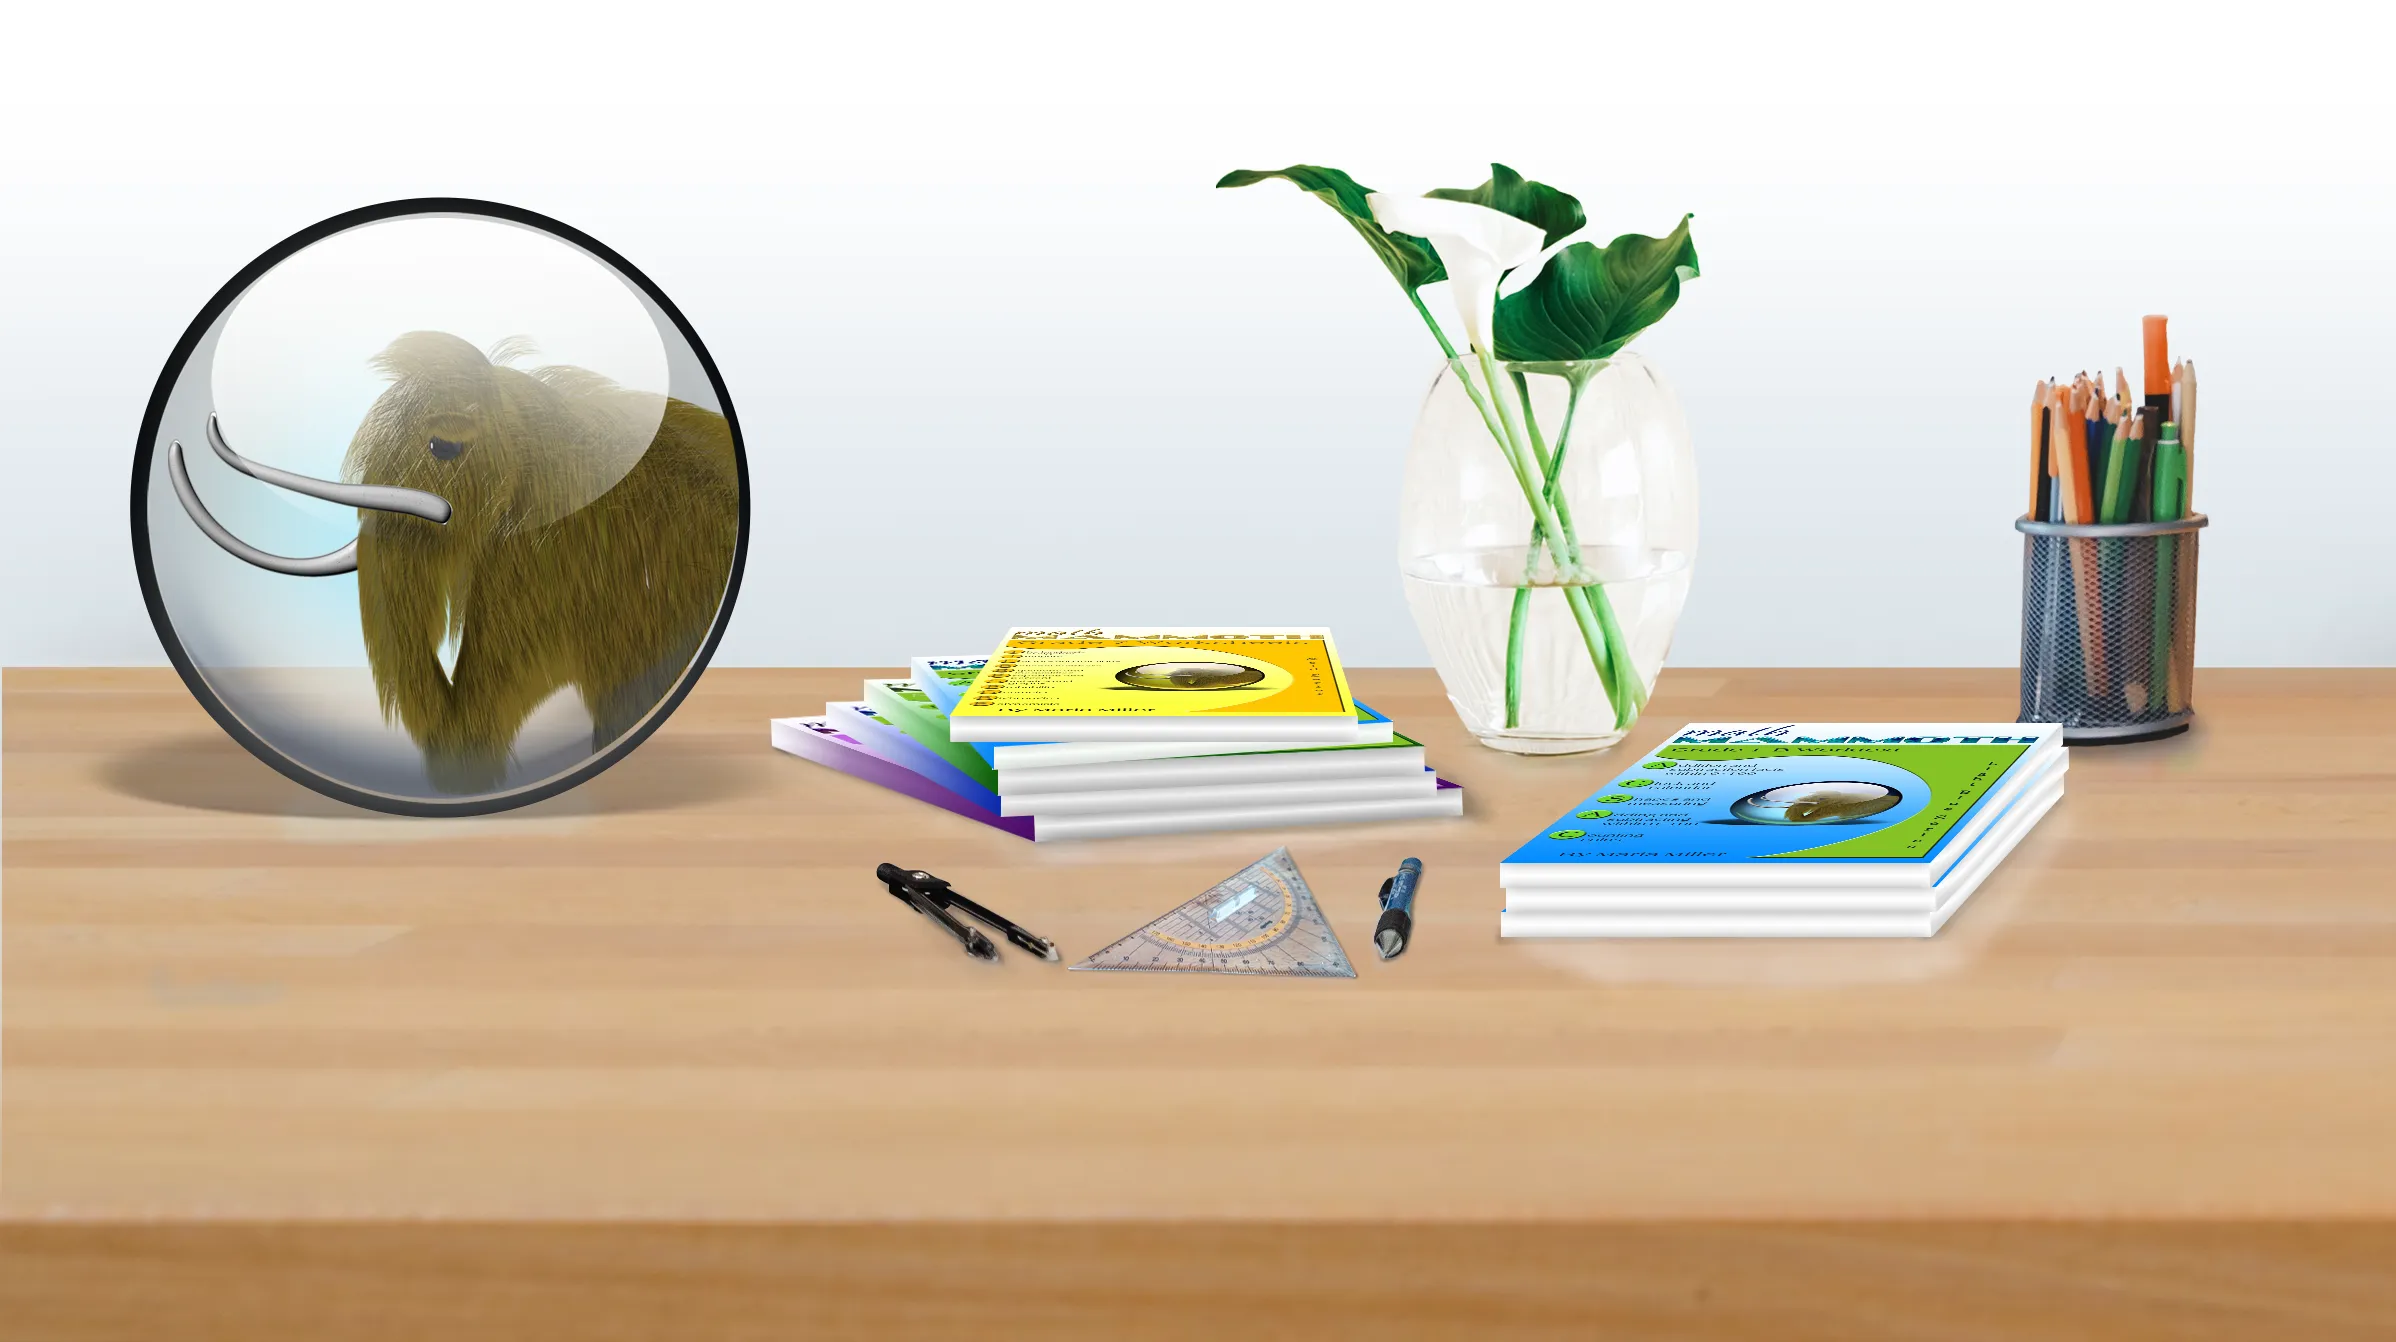 Table with globe, school supplies and vase with plant